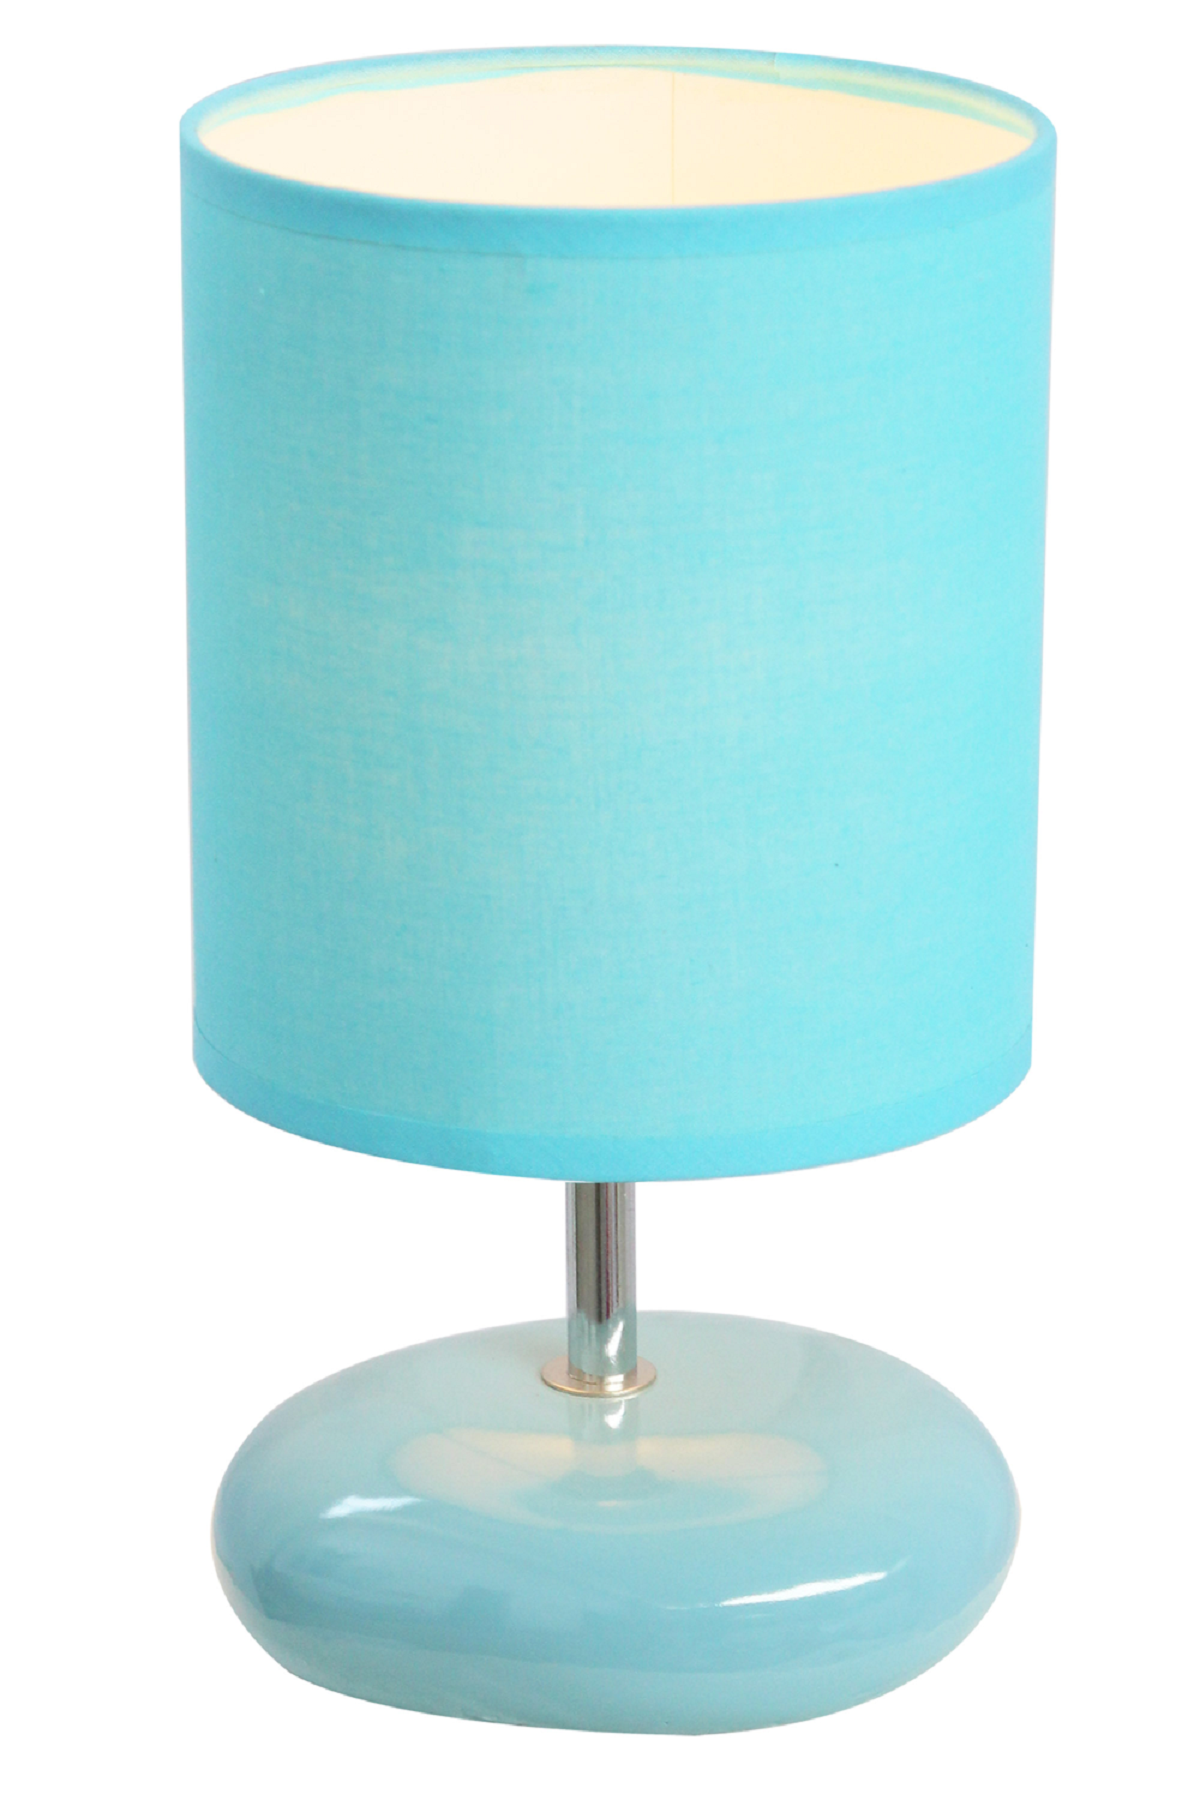 Simple Designs Stonies Blue Small Stone Look Table Lamp